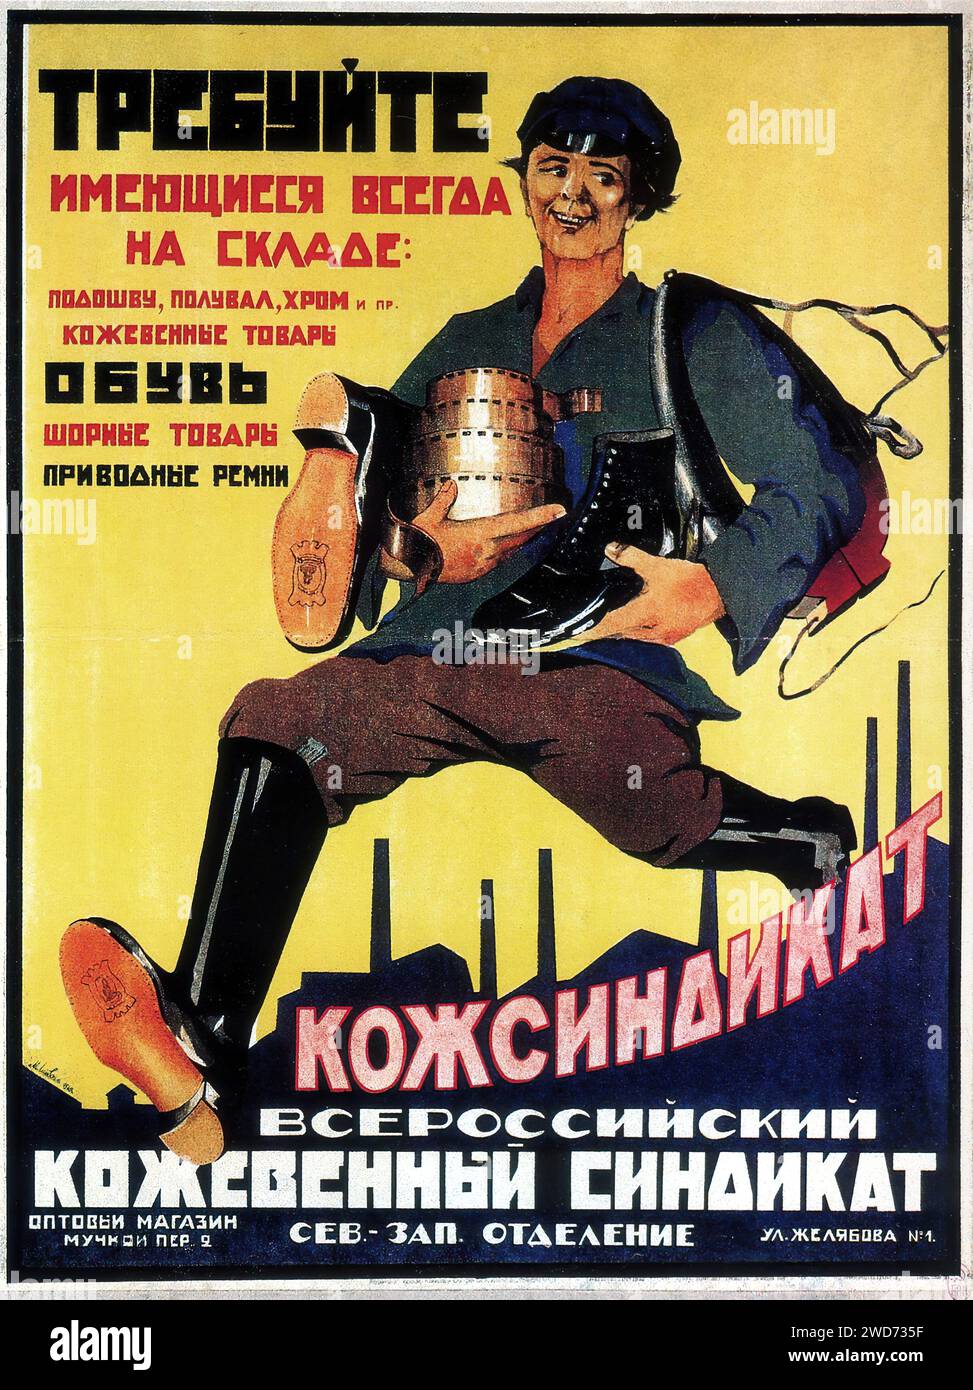 M. Litvak. Demand Kozhsyndicate shoes. 1925 - Vintage Soviet Advertising and propaganda - Требуйте имеющиеся вещи на складе; - 'Demand items available in stock'; The poster features a smiling woman holding a pair of boots; with text urging consumers to demand available goods. It reflects the style of Soviet commercial advertising; using bright colors and positive imagery to encourage consumer behavior Stock Photo